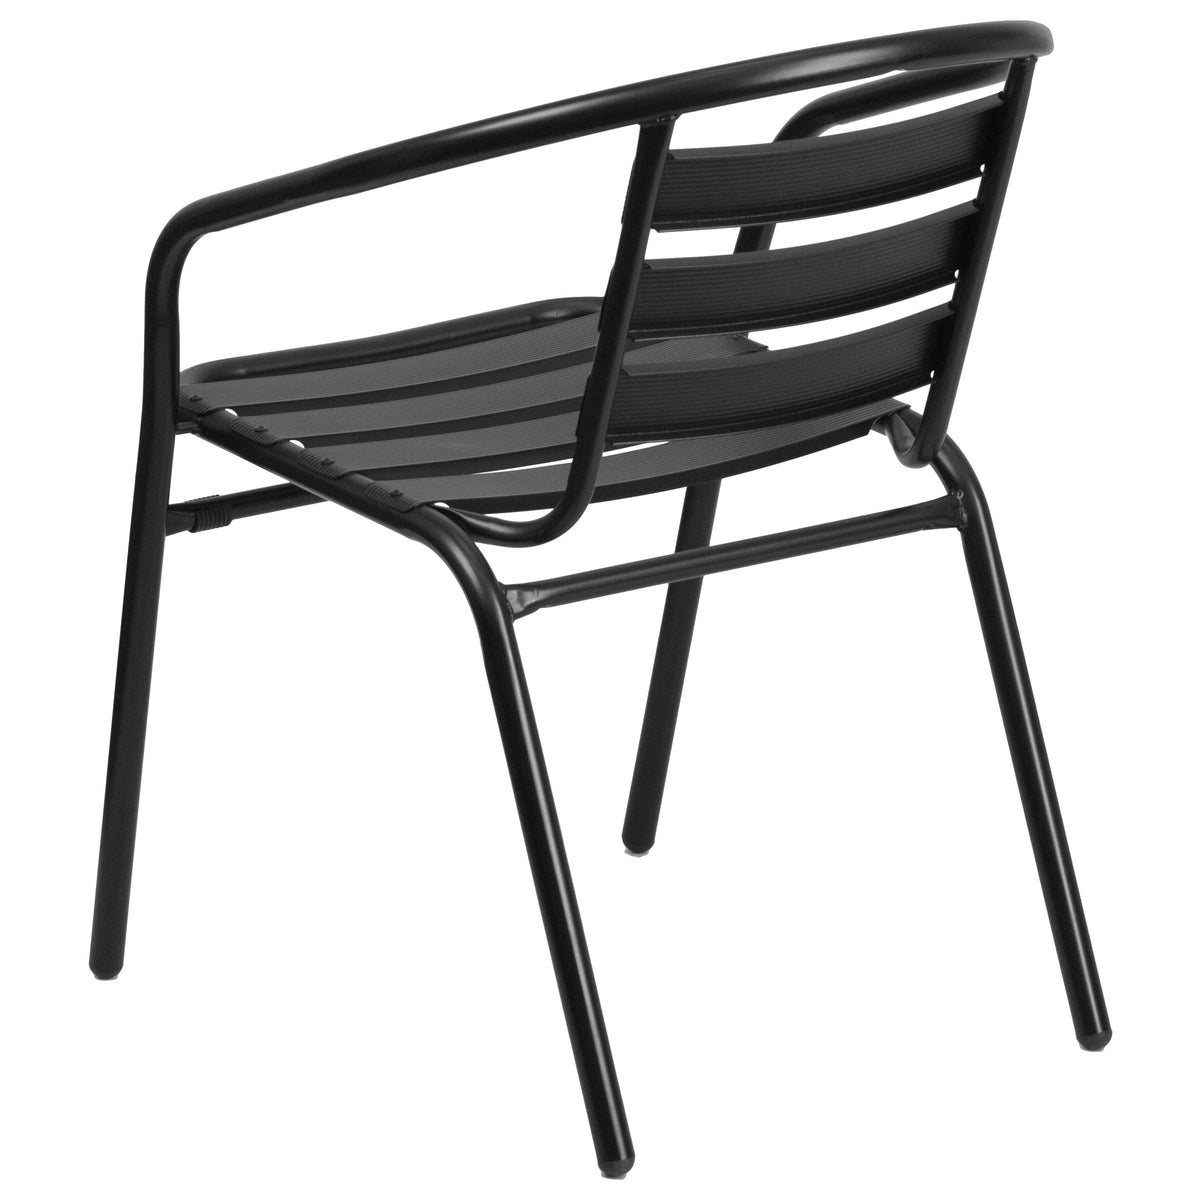 Black |#| 23.5inch Square Glass Metal Table with 2 Black Metal Aluminum Slat Stack Chairs